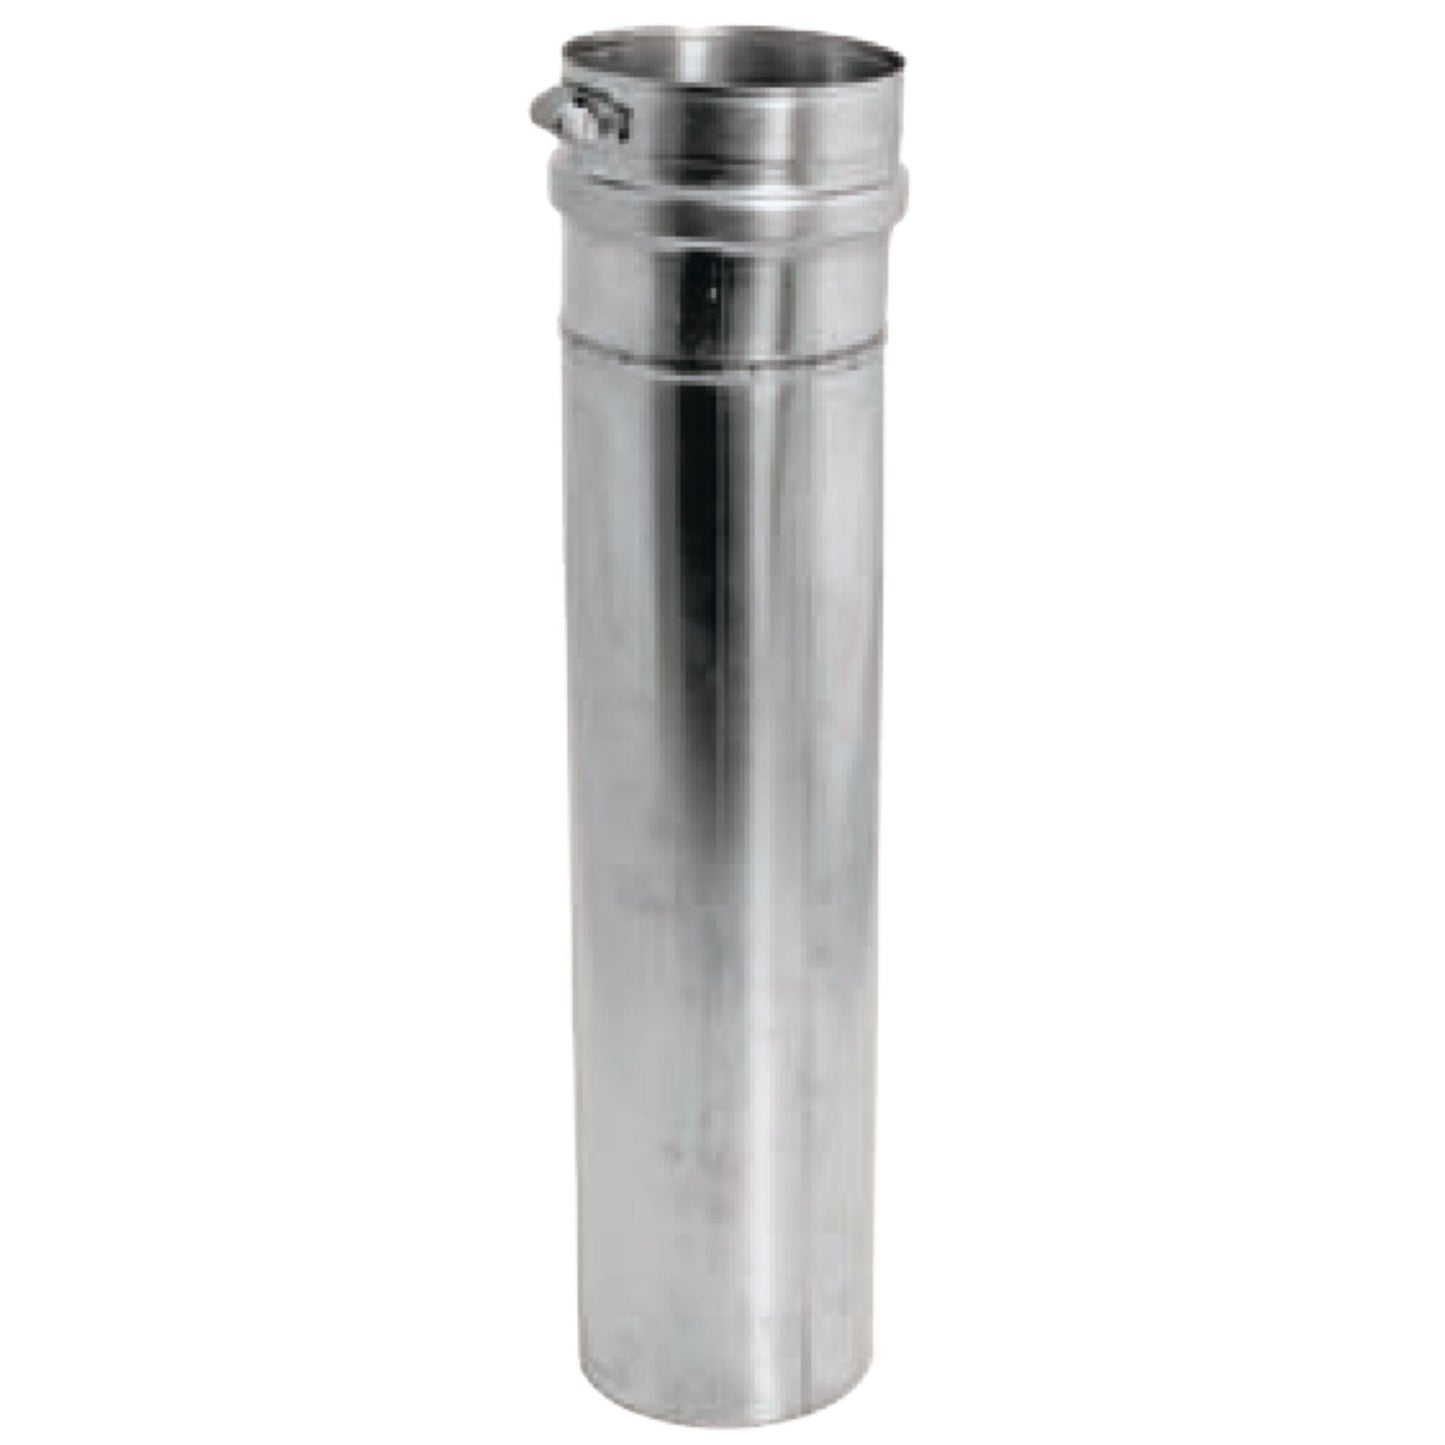 DuraVent FasNSeal 12" 2 Degree 29-4C Stainless Steel Adjustable Vent Length